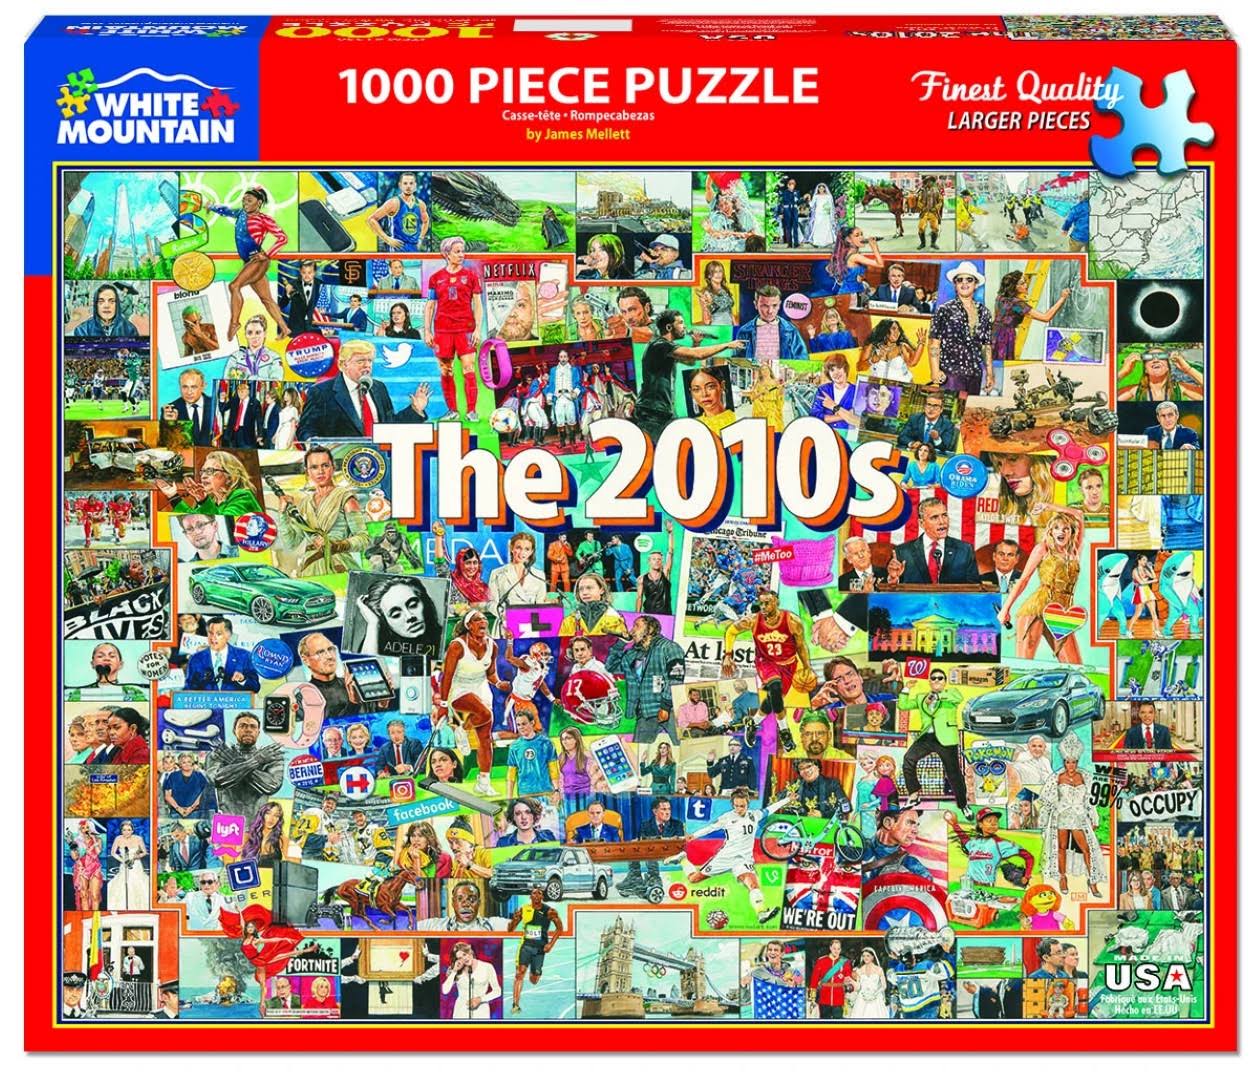 1000 Piece Jigsaw Puzzle - The 2010s